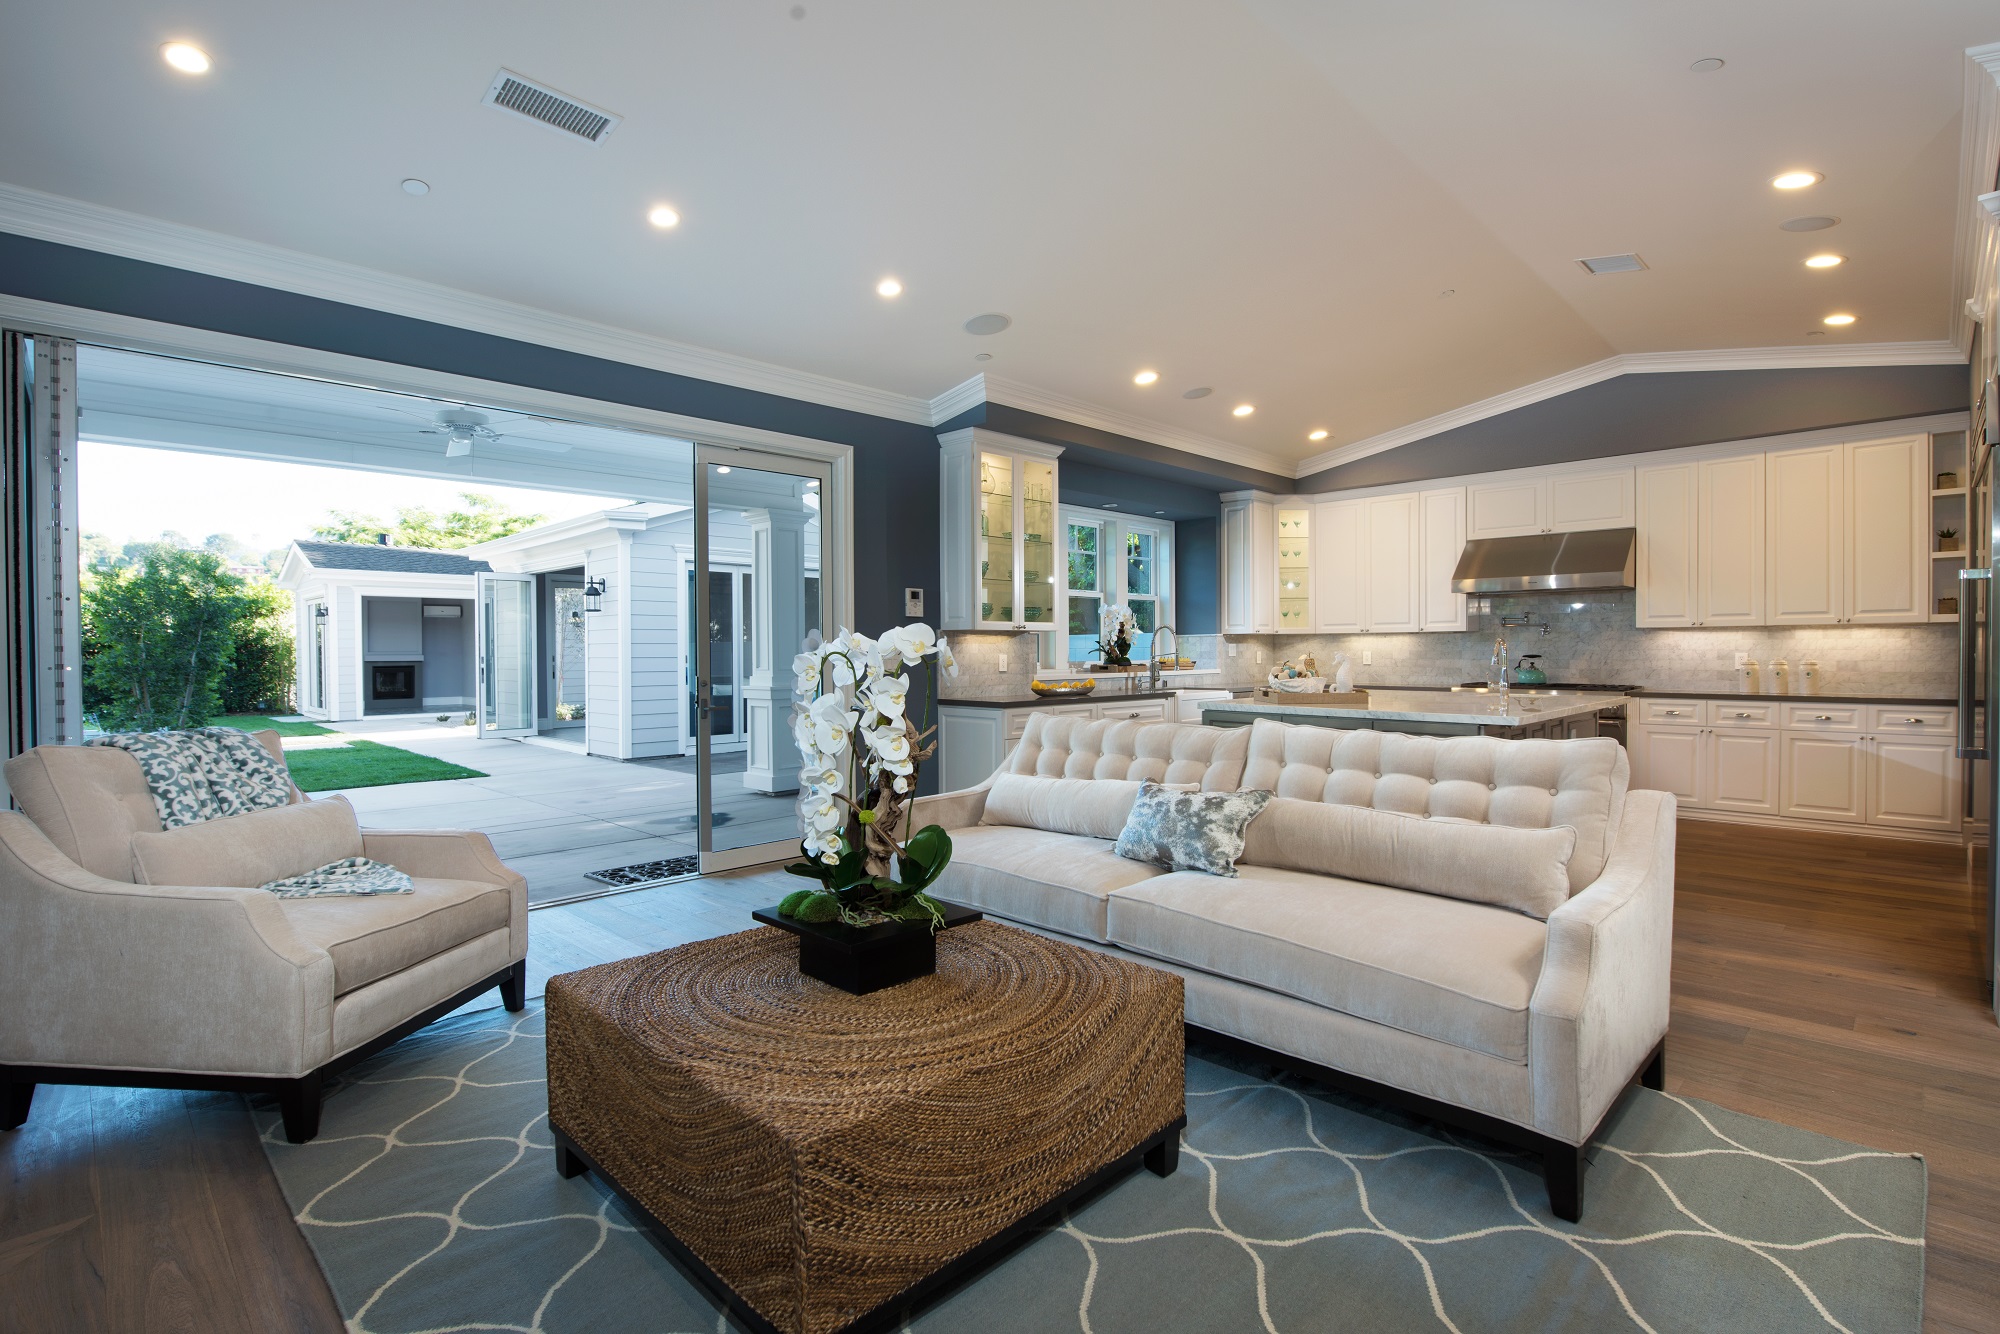 This spacious living room features a sliding glass wall to the back patio, part of a complete home remodel by Los Angeles design-build firm A-List Builders.